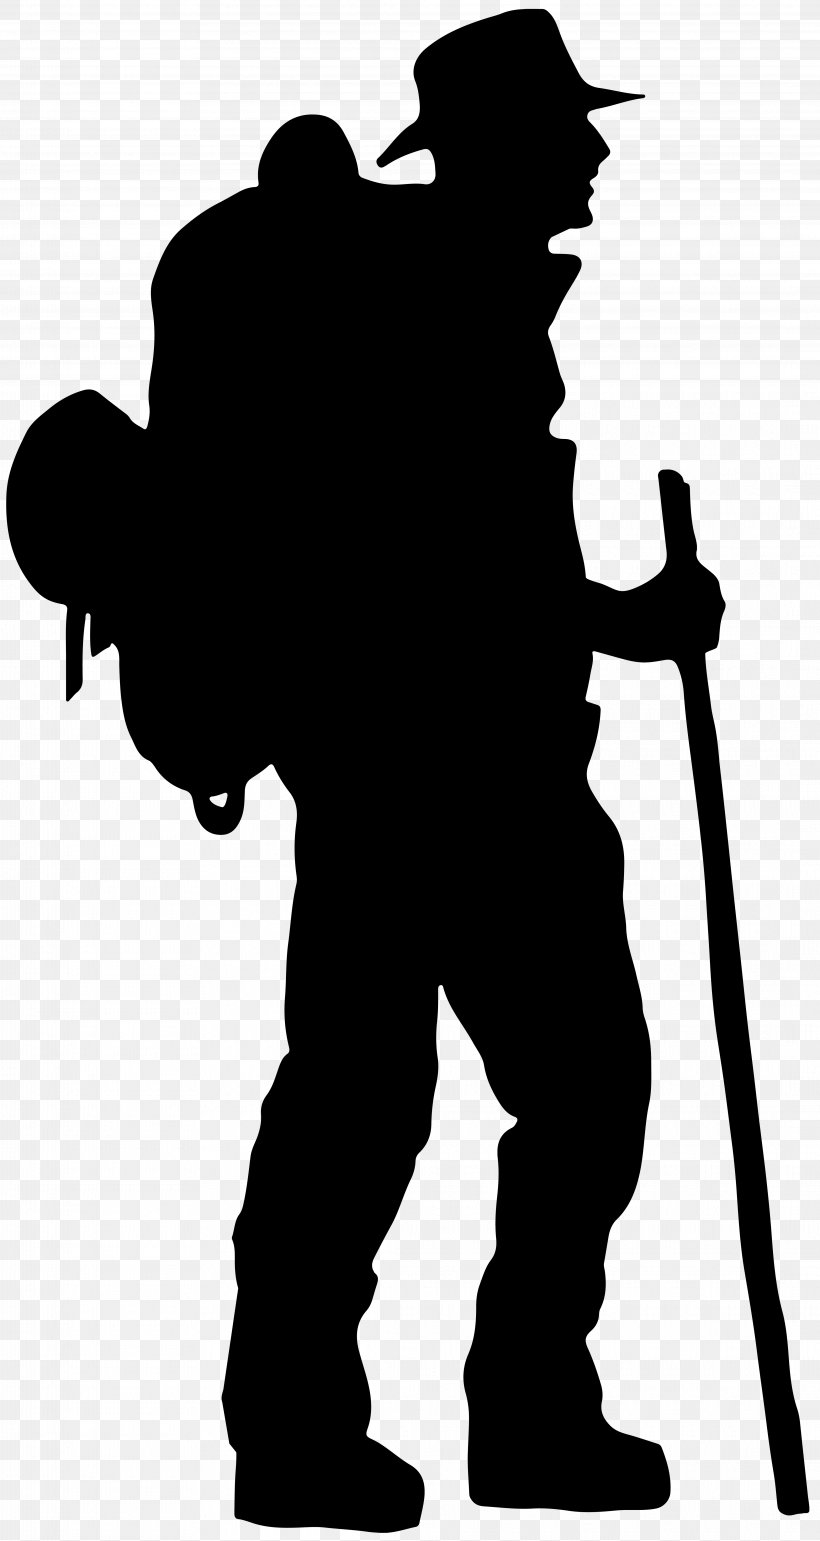 Silhouette Climbing Clip Art, PNG, 4255x8000px, Silhouette, Black, Black And White, Climbing, Climbing Wall Download Free